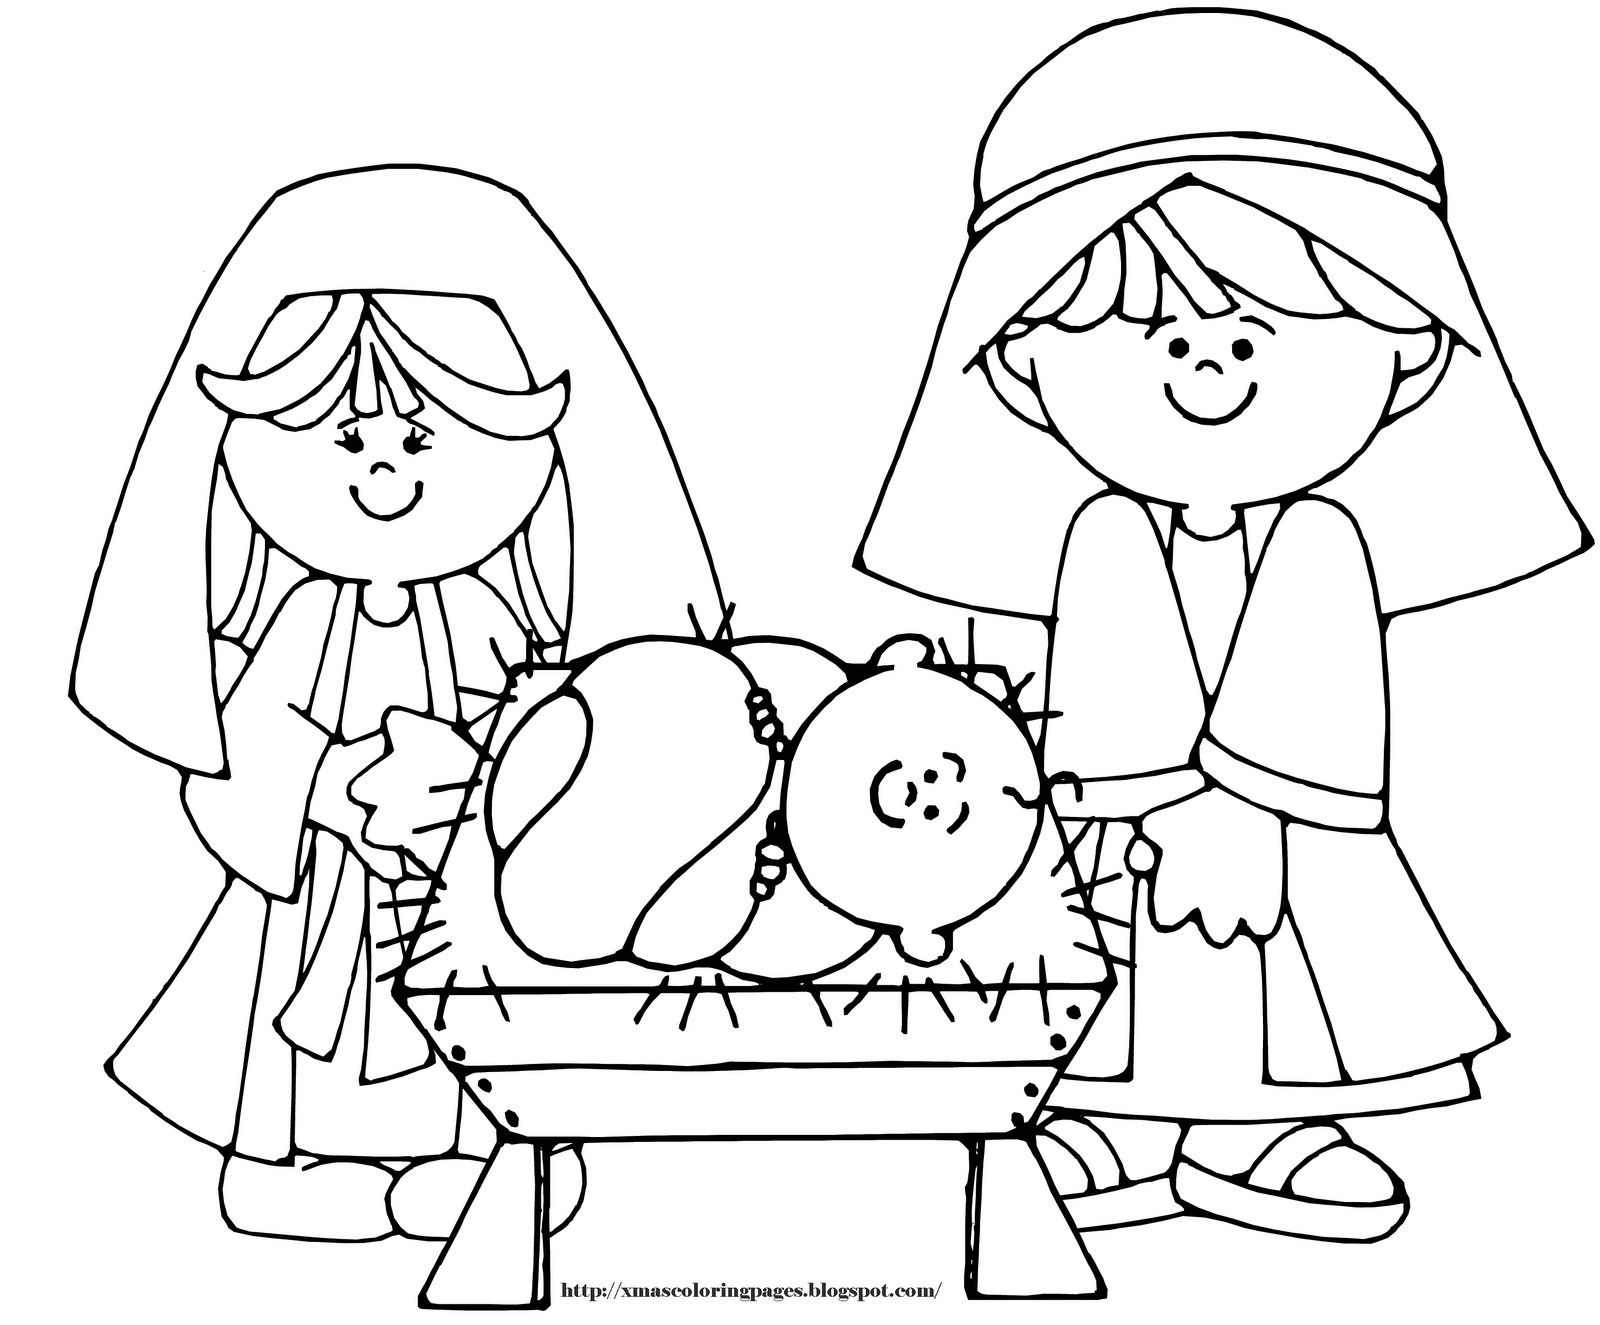 Baby Jesus Coloring Pages Printable Free
 XMAS COLORING PAGES